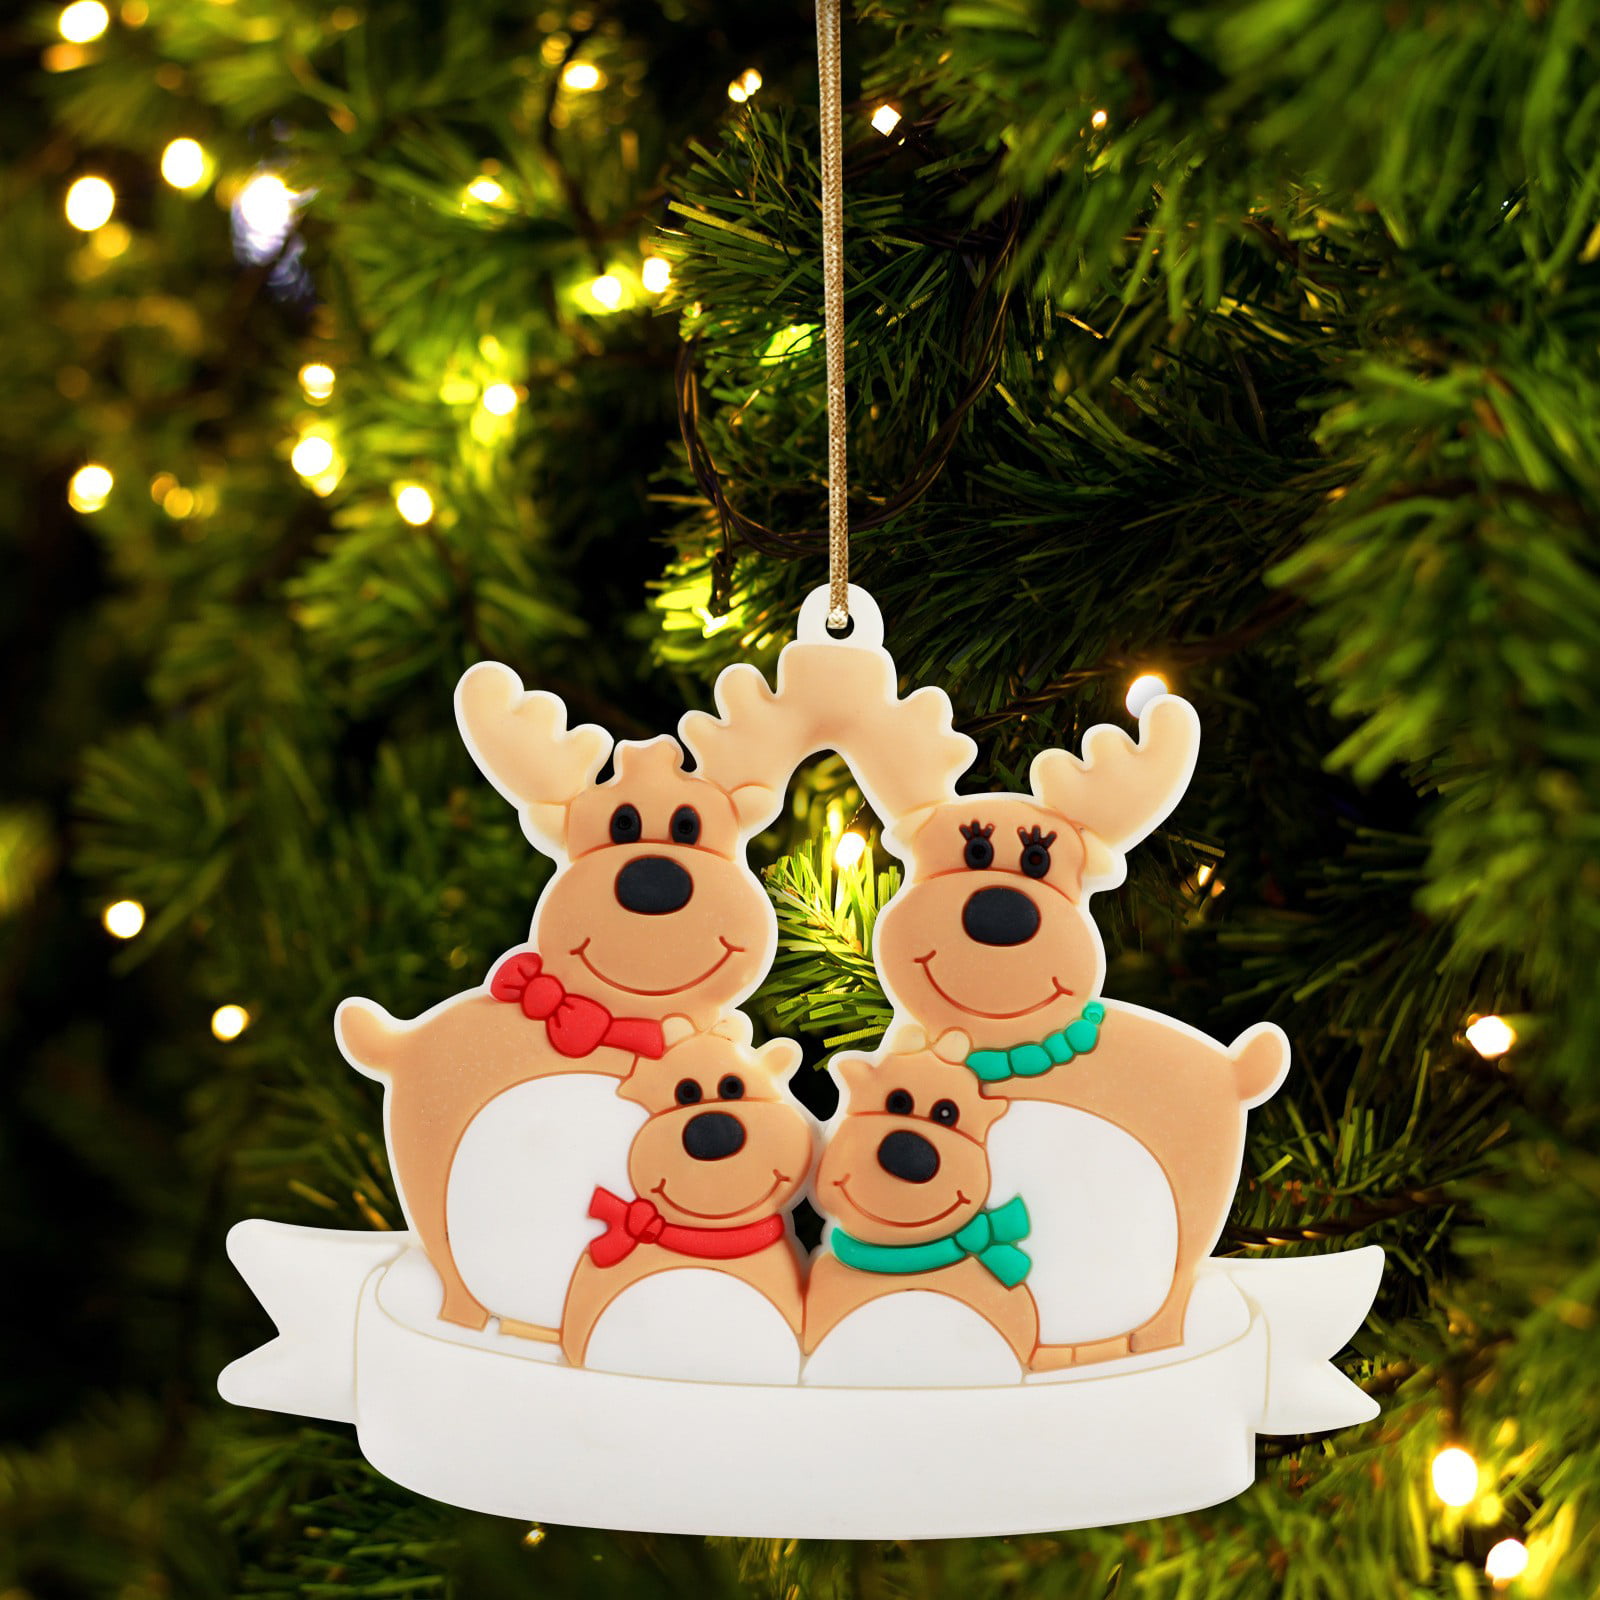 Details about   PERSONALIZED Christmas Tree Ornament Holiday Gift Family Santa Peas 